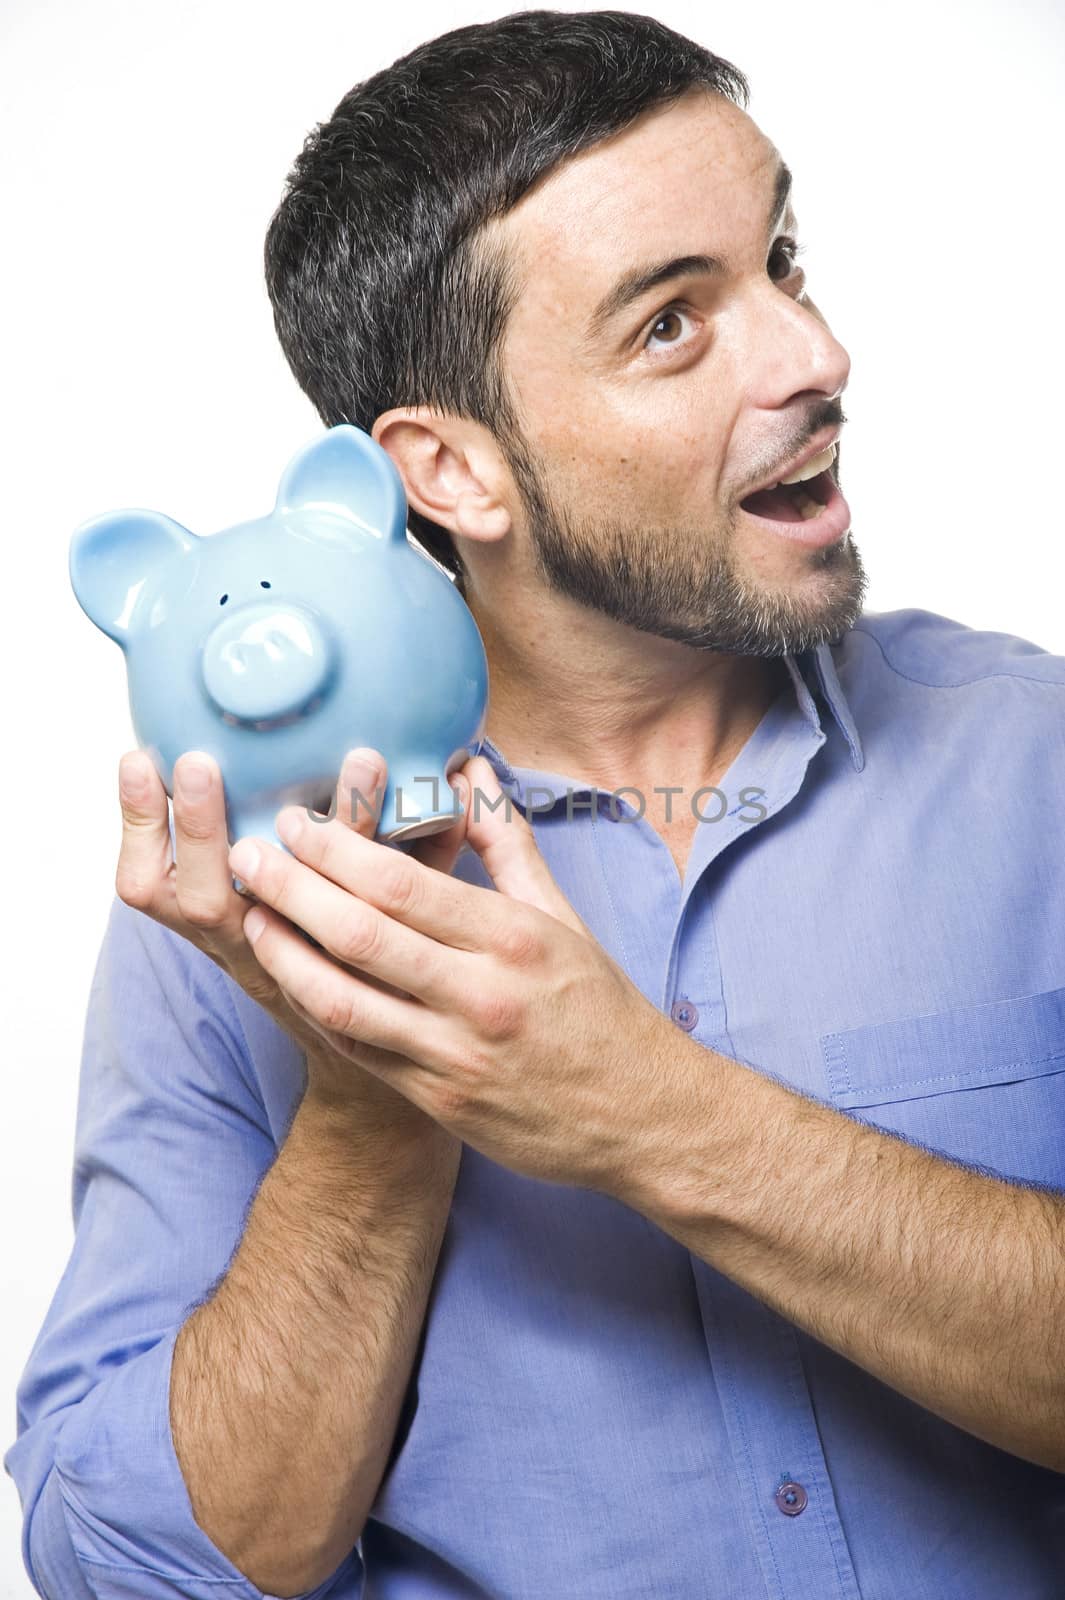 Handsome Young Man with Beard shaking Blue Piggy bank Isolated on White Background